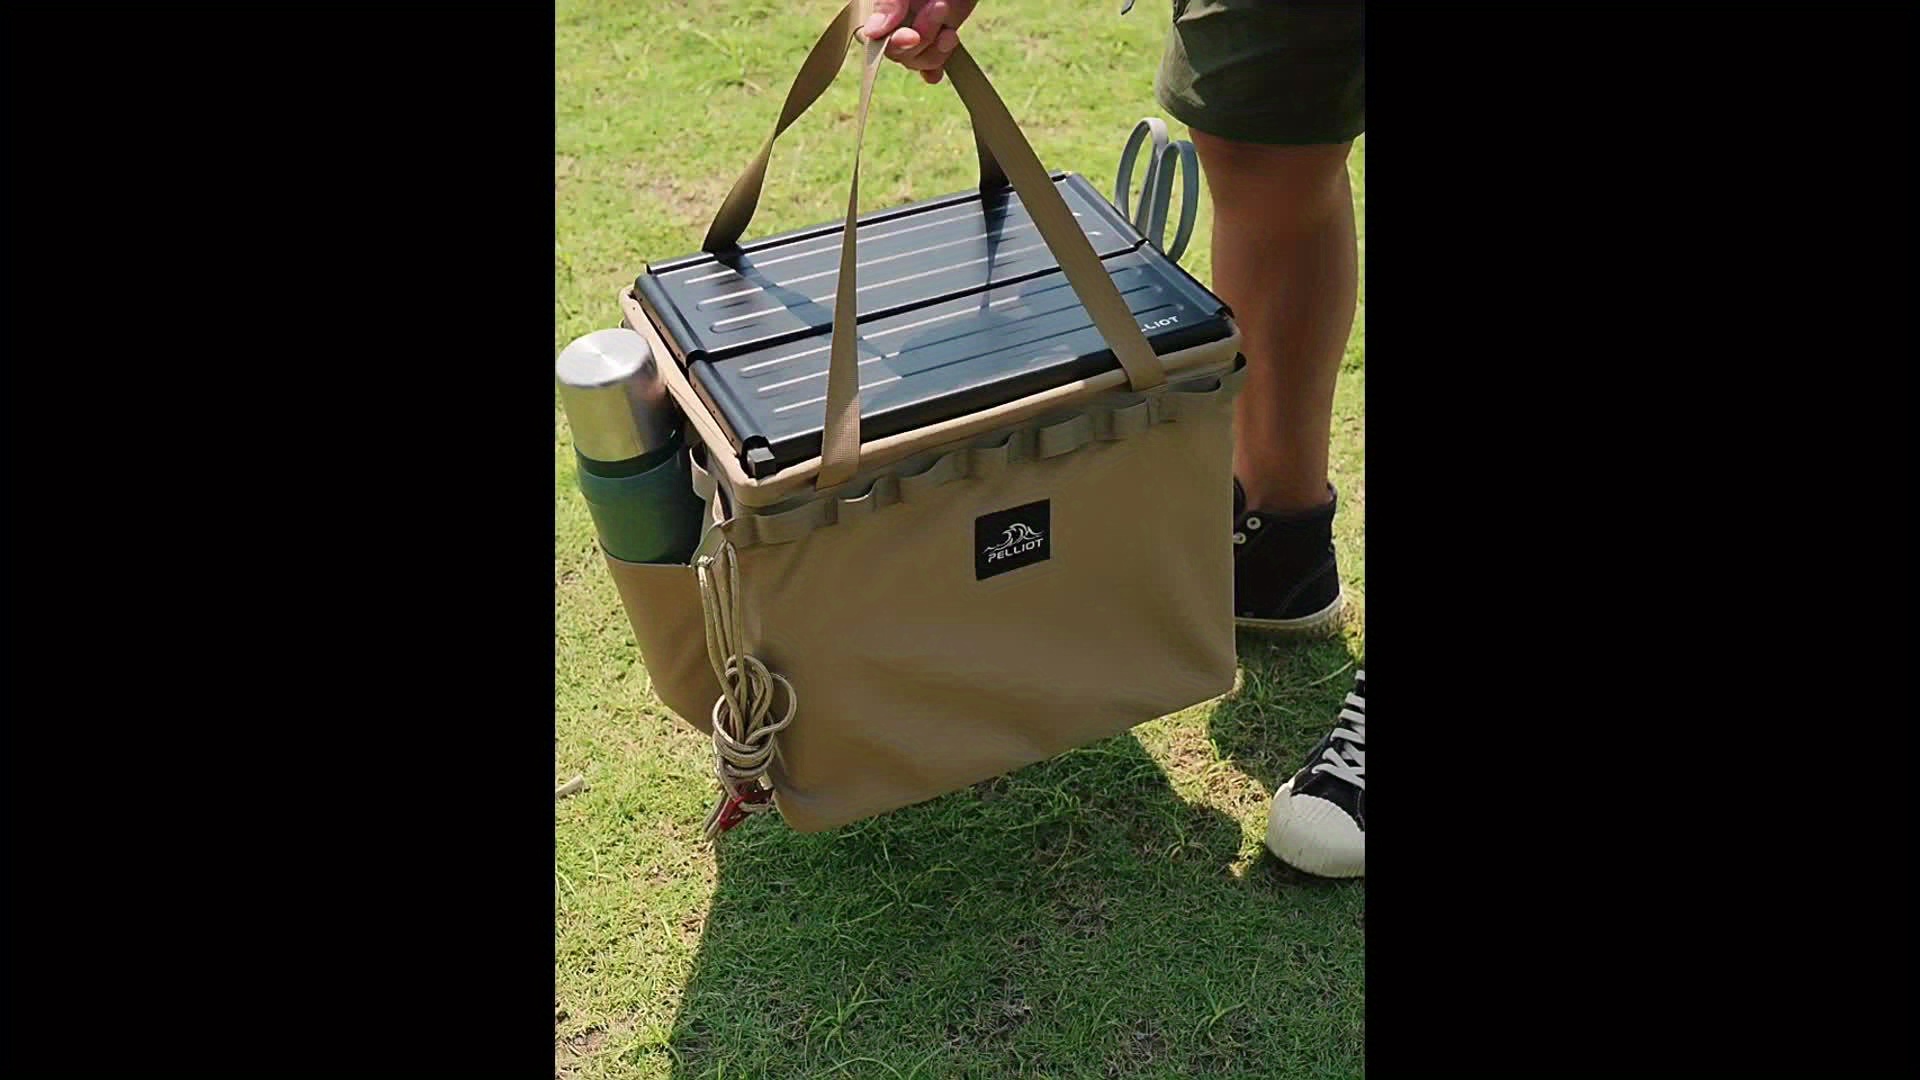 Camping Storage Bag, Portable Multifunctional Tools Storage Box For Outdoor Camping Hiking